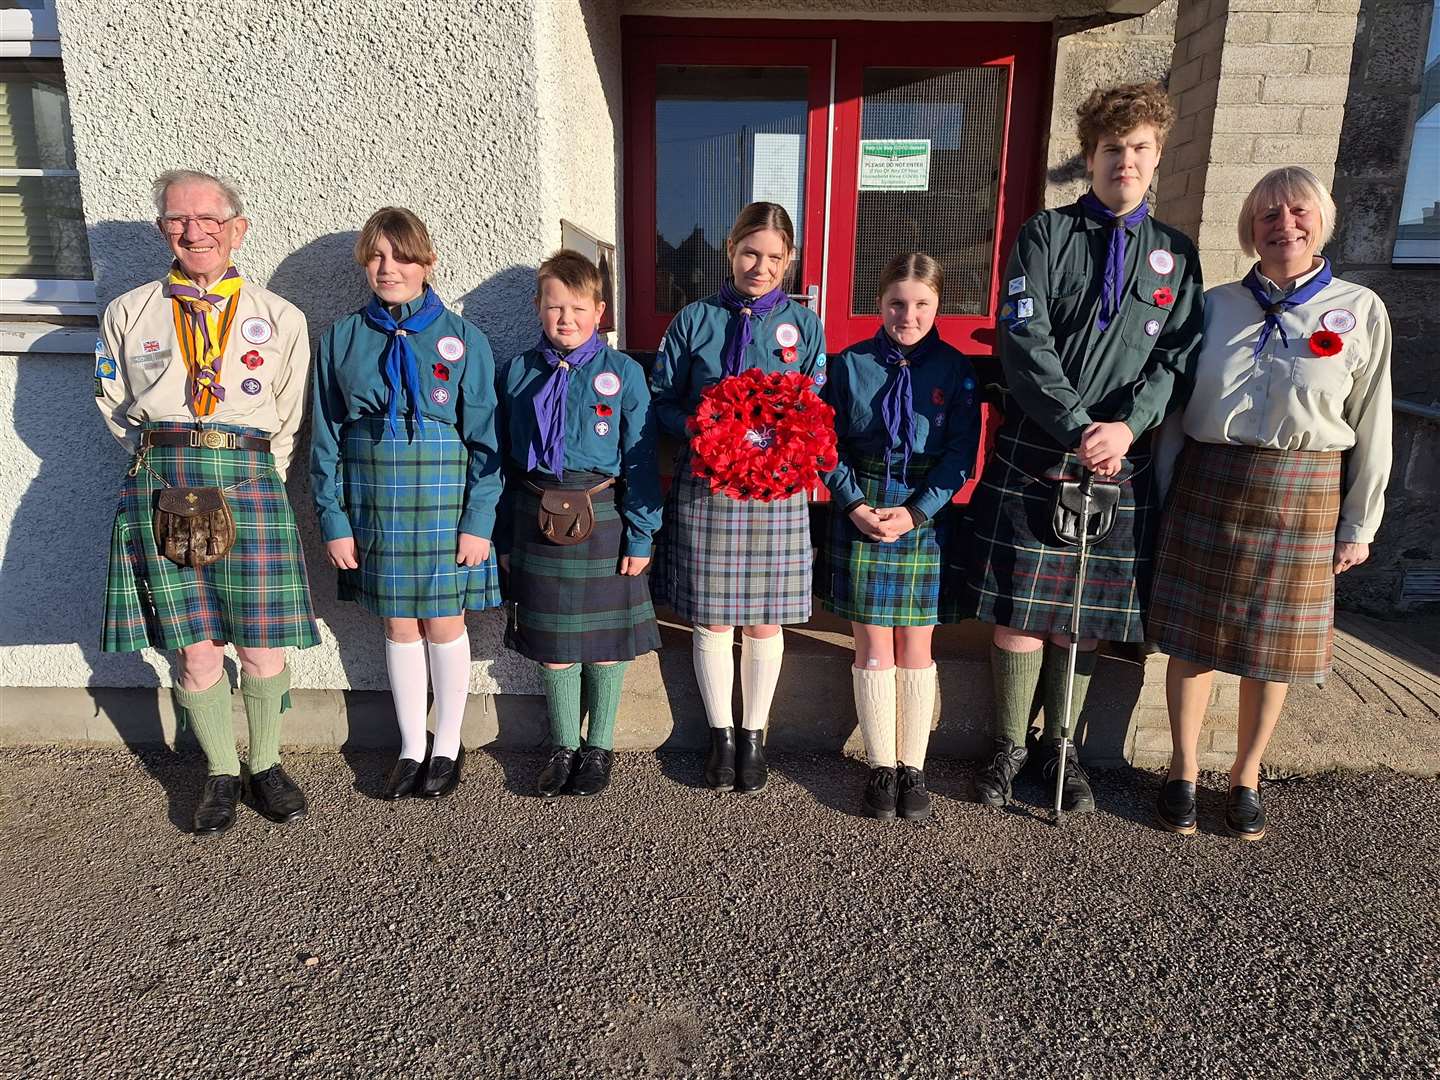 Members of the 1st Brora Scout Group took part in the parade and laid a wreath on behalf of the organisation. From left, Scout leader Davy MacDonald, Katie Smith, Kyle Smith, Isla Hirst, Rachel Drain, Mathieu-luc Bellis, and Assistant Scout Leader Kath Rennox.